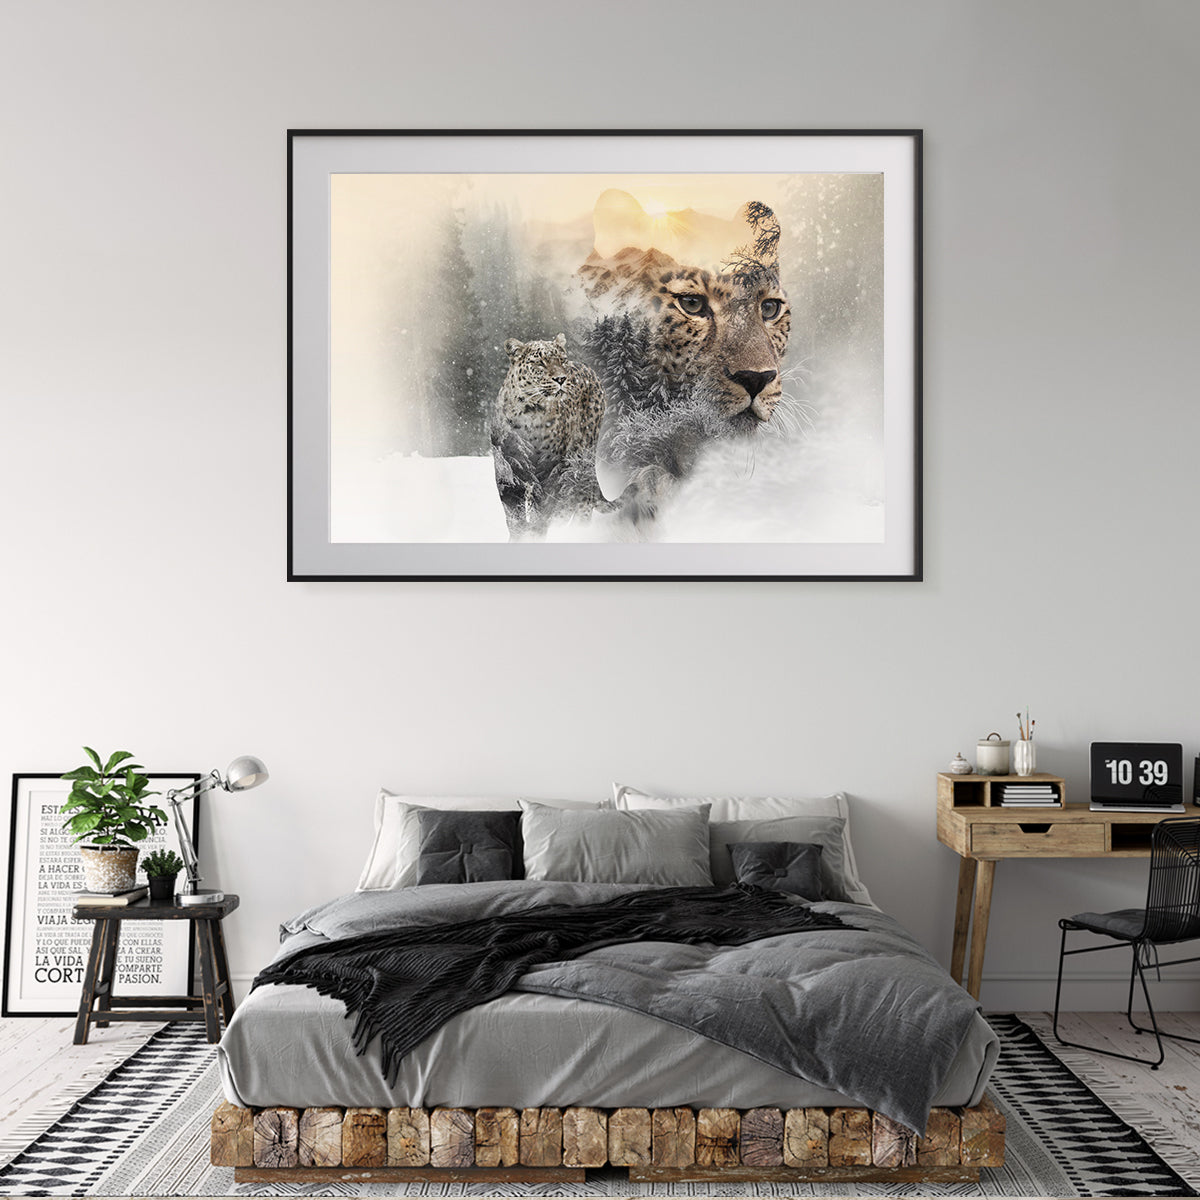 Snow Leopard in Winter Forest Posters Prints Wall Decor-Horizontal Posters NOT FRAMED-CetArt-10″x8″ inches-CetArt